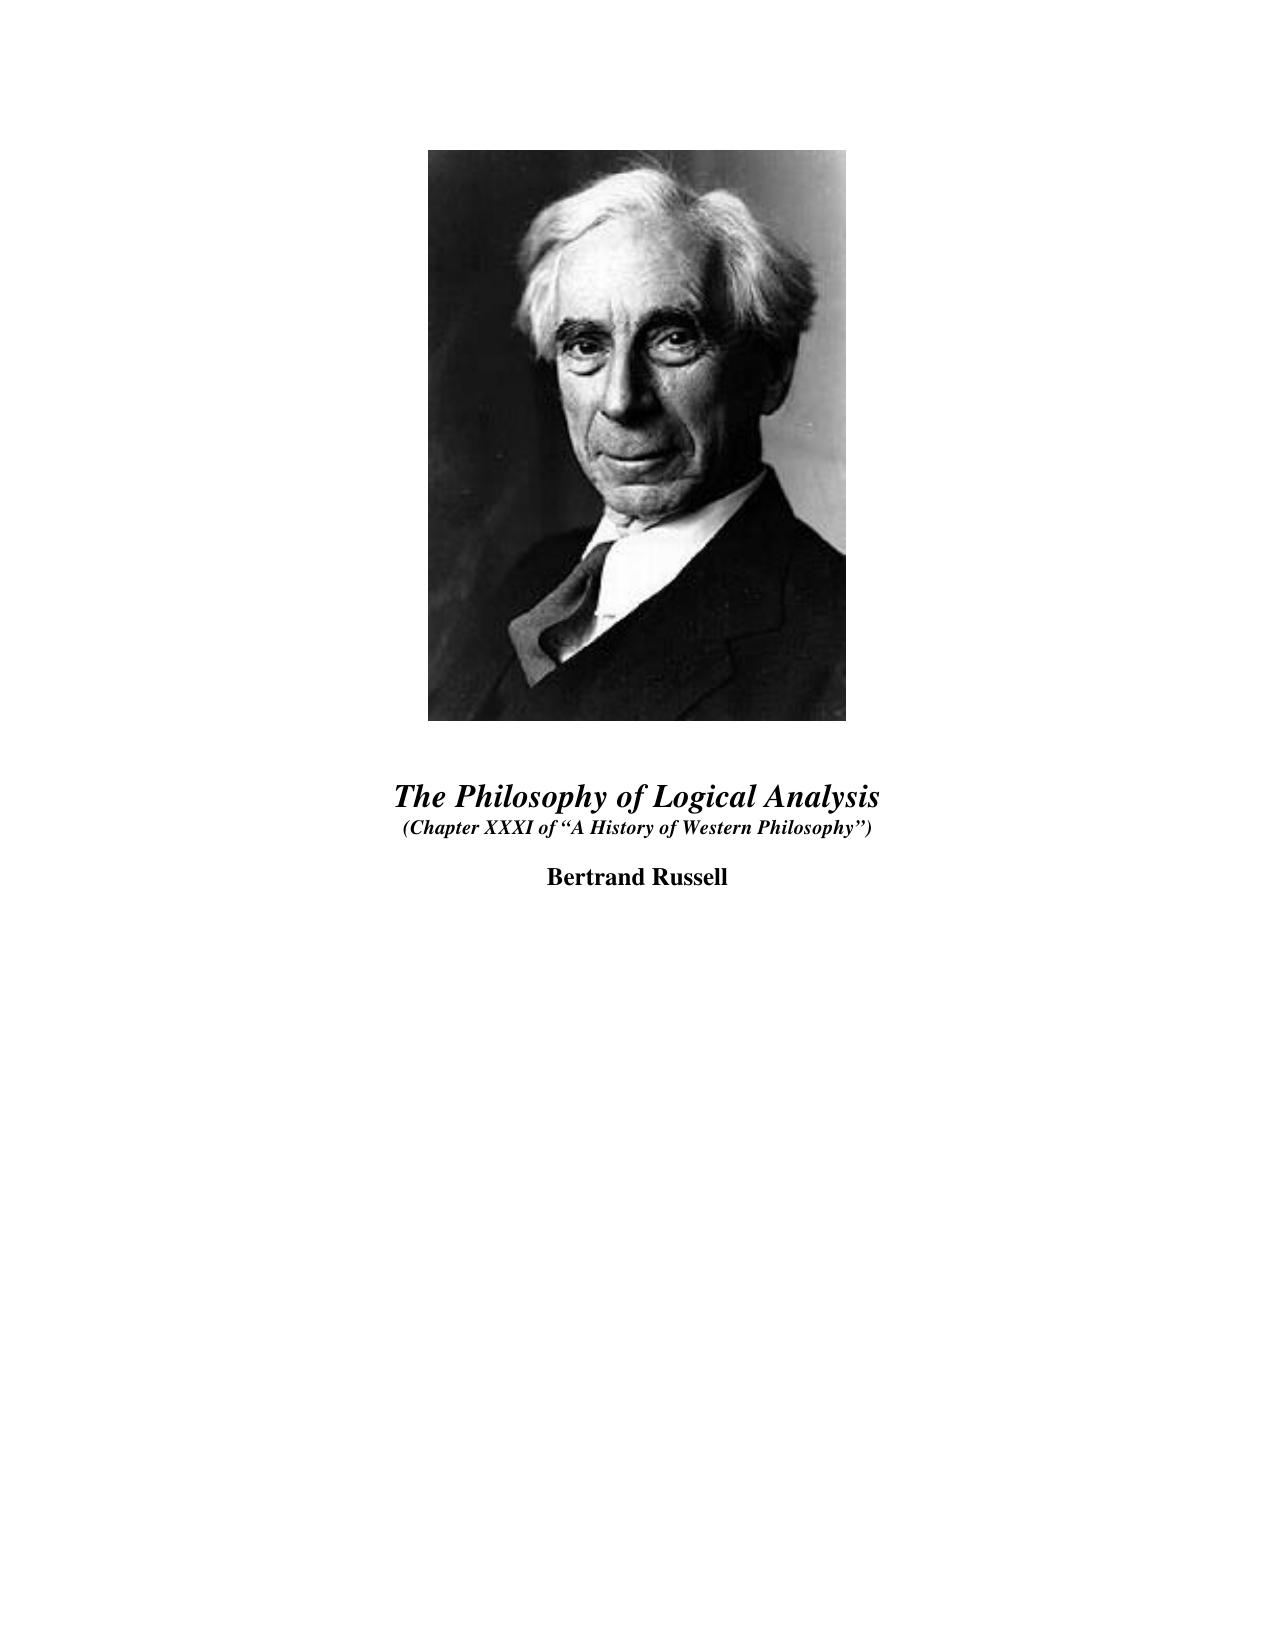 The Philosophy of Logical Analysis - Chapter 31 of A History of Western Philosophy